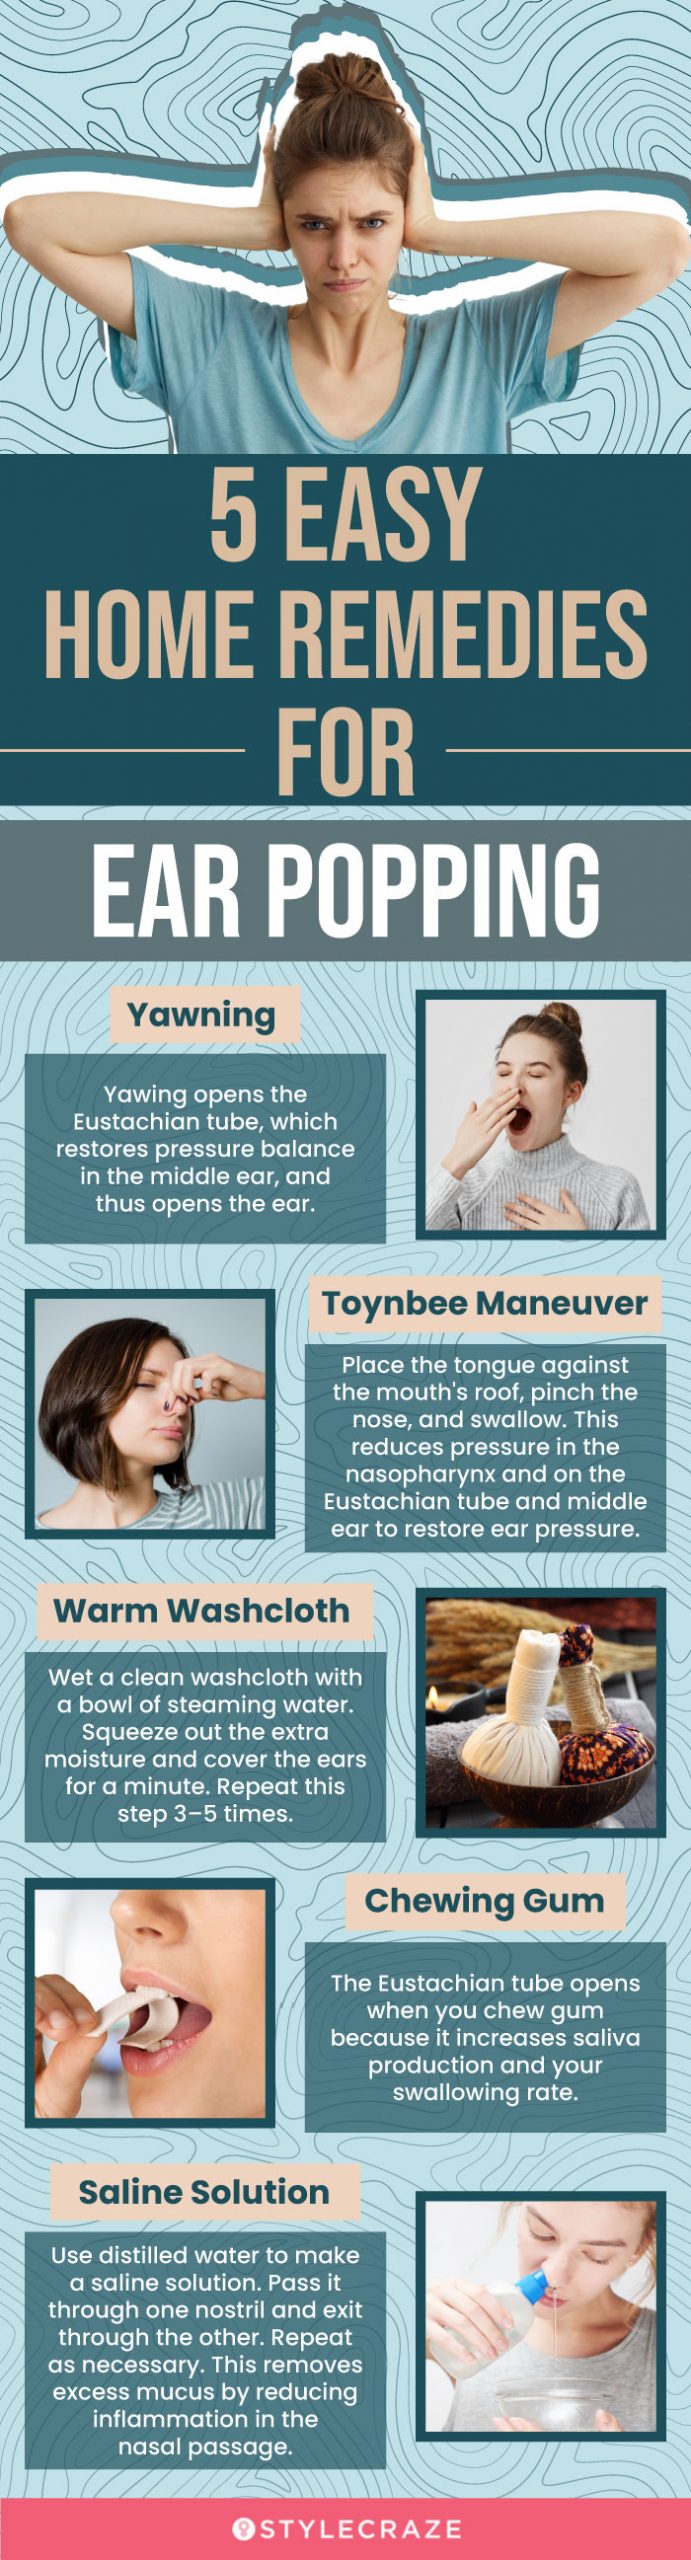 Ear Popping: 10 Home Remedies And To Prevent